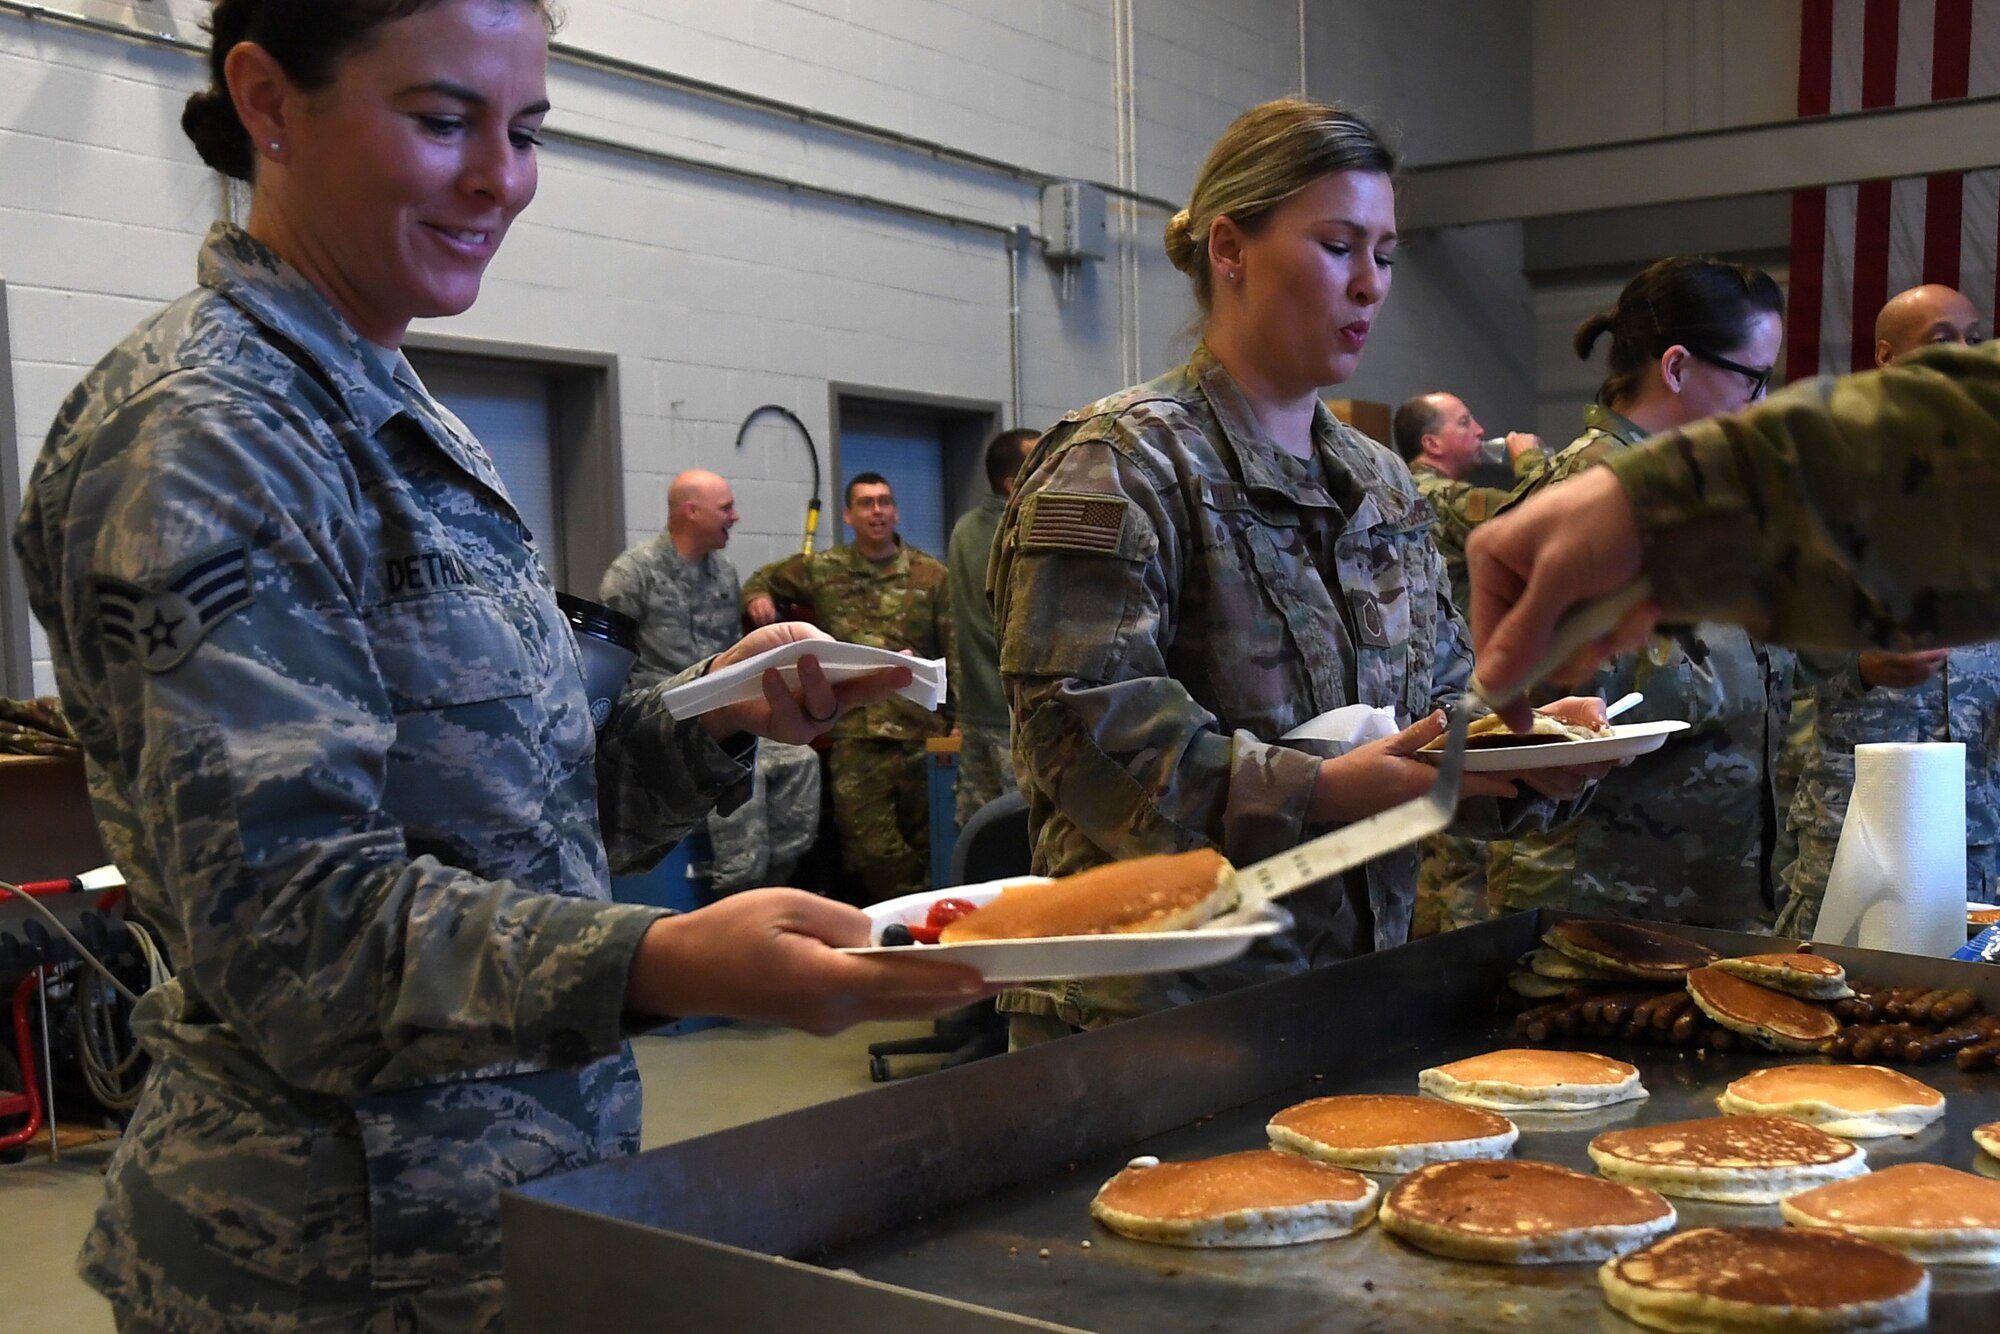 North Carolina Air National Guardsmen are served pancakes hot from the grill during a breakfast fundraiser, Jan. 12, 2020 at the 235th Air Traffic Control Squadron in New London, N.C. Members of the North Carolina Air National Guard as well as local airport authorities and law enforcement were invited to participate in a pancake breakfast social in order to strengthen community ties and build new relationships while raising funds for Morale, Welfare and Recreation.